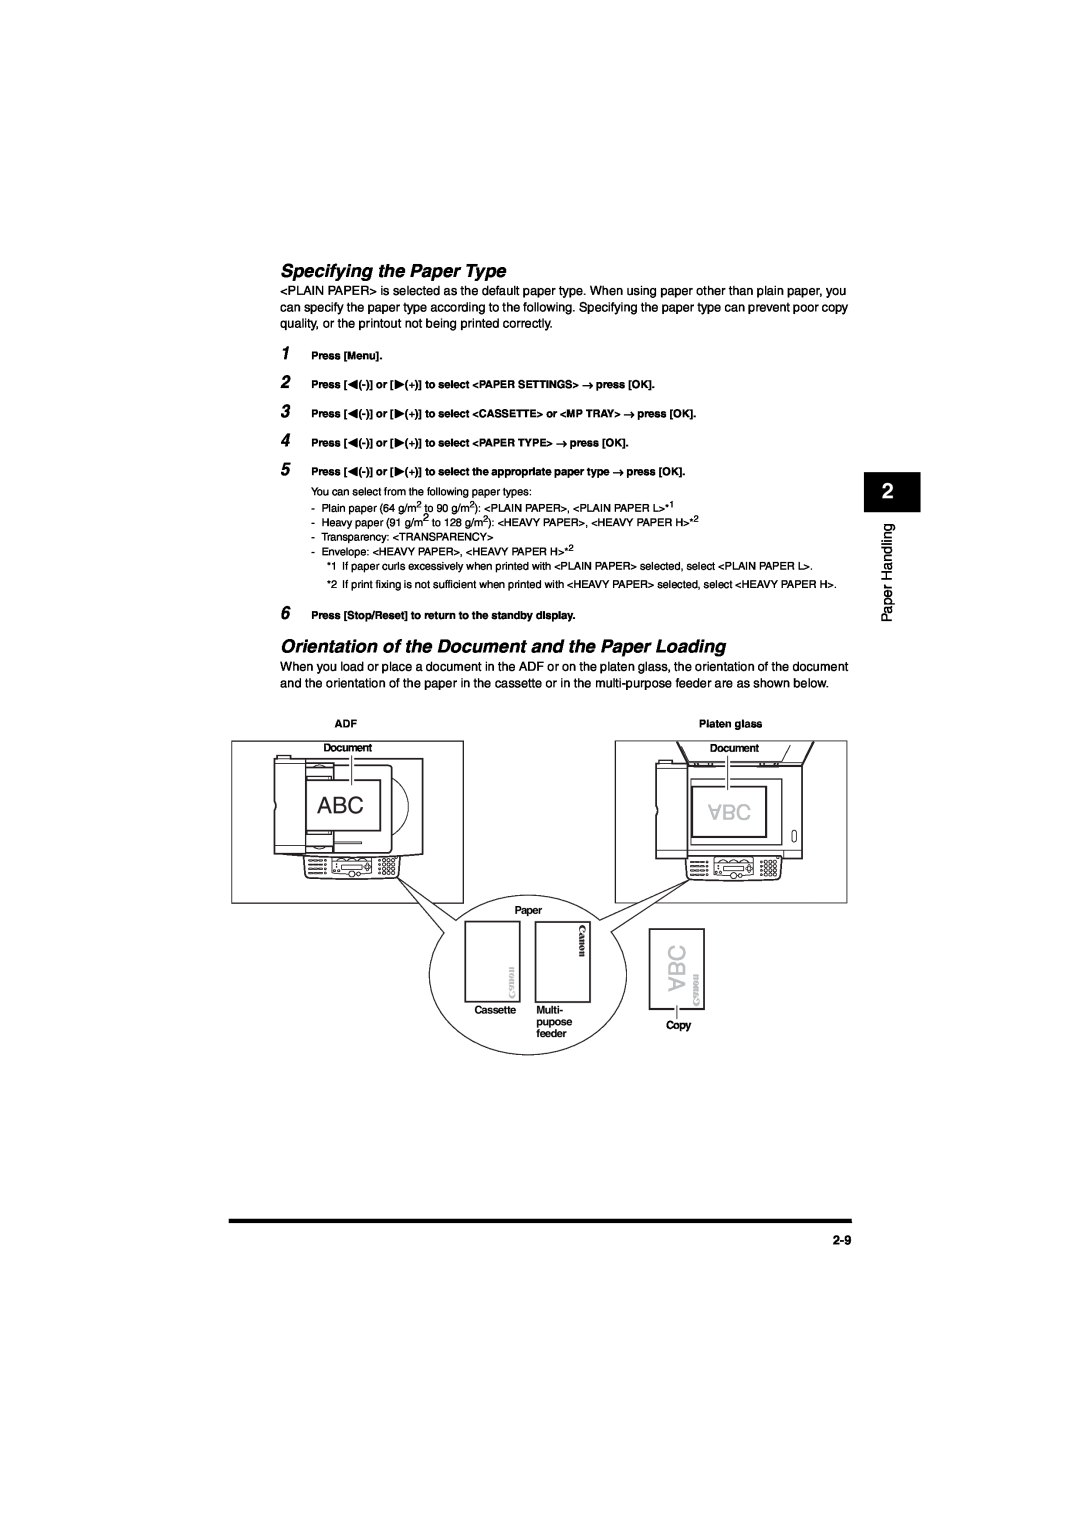 Canon MF5650 manual Specifying the Paper Type, Orientation of the Document and the Paper Loading, Paper Handling 